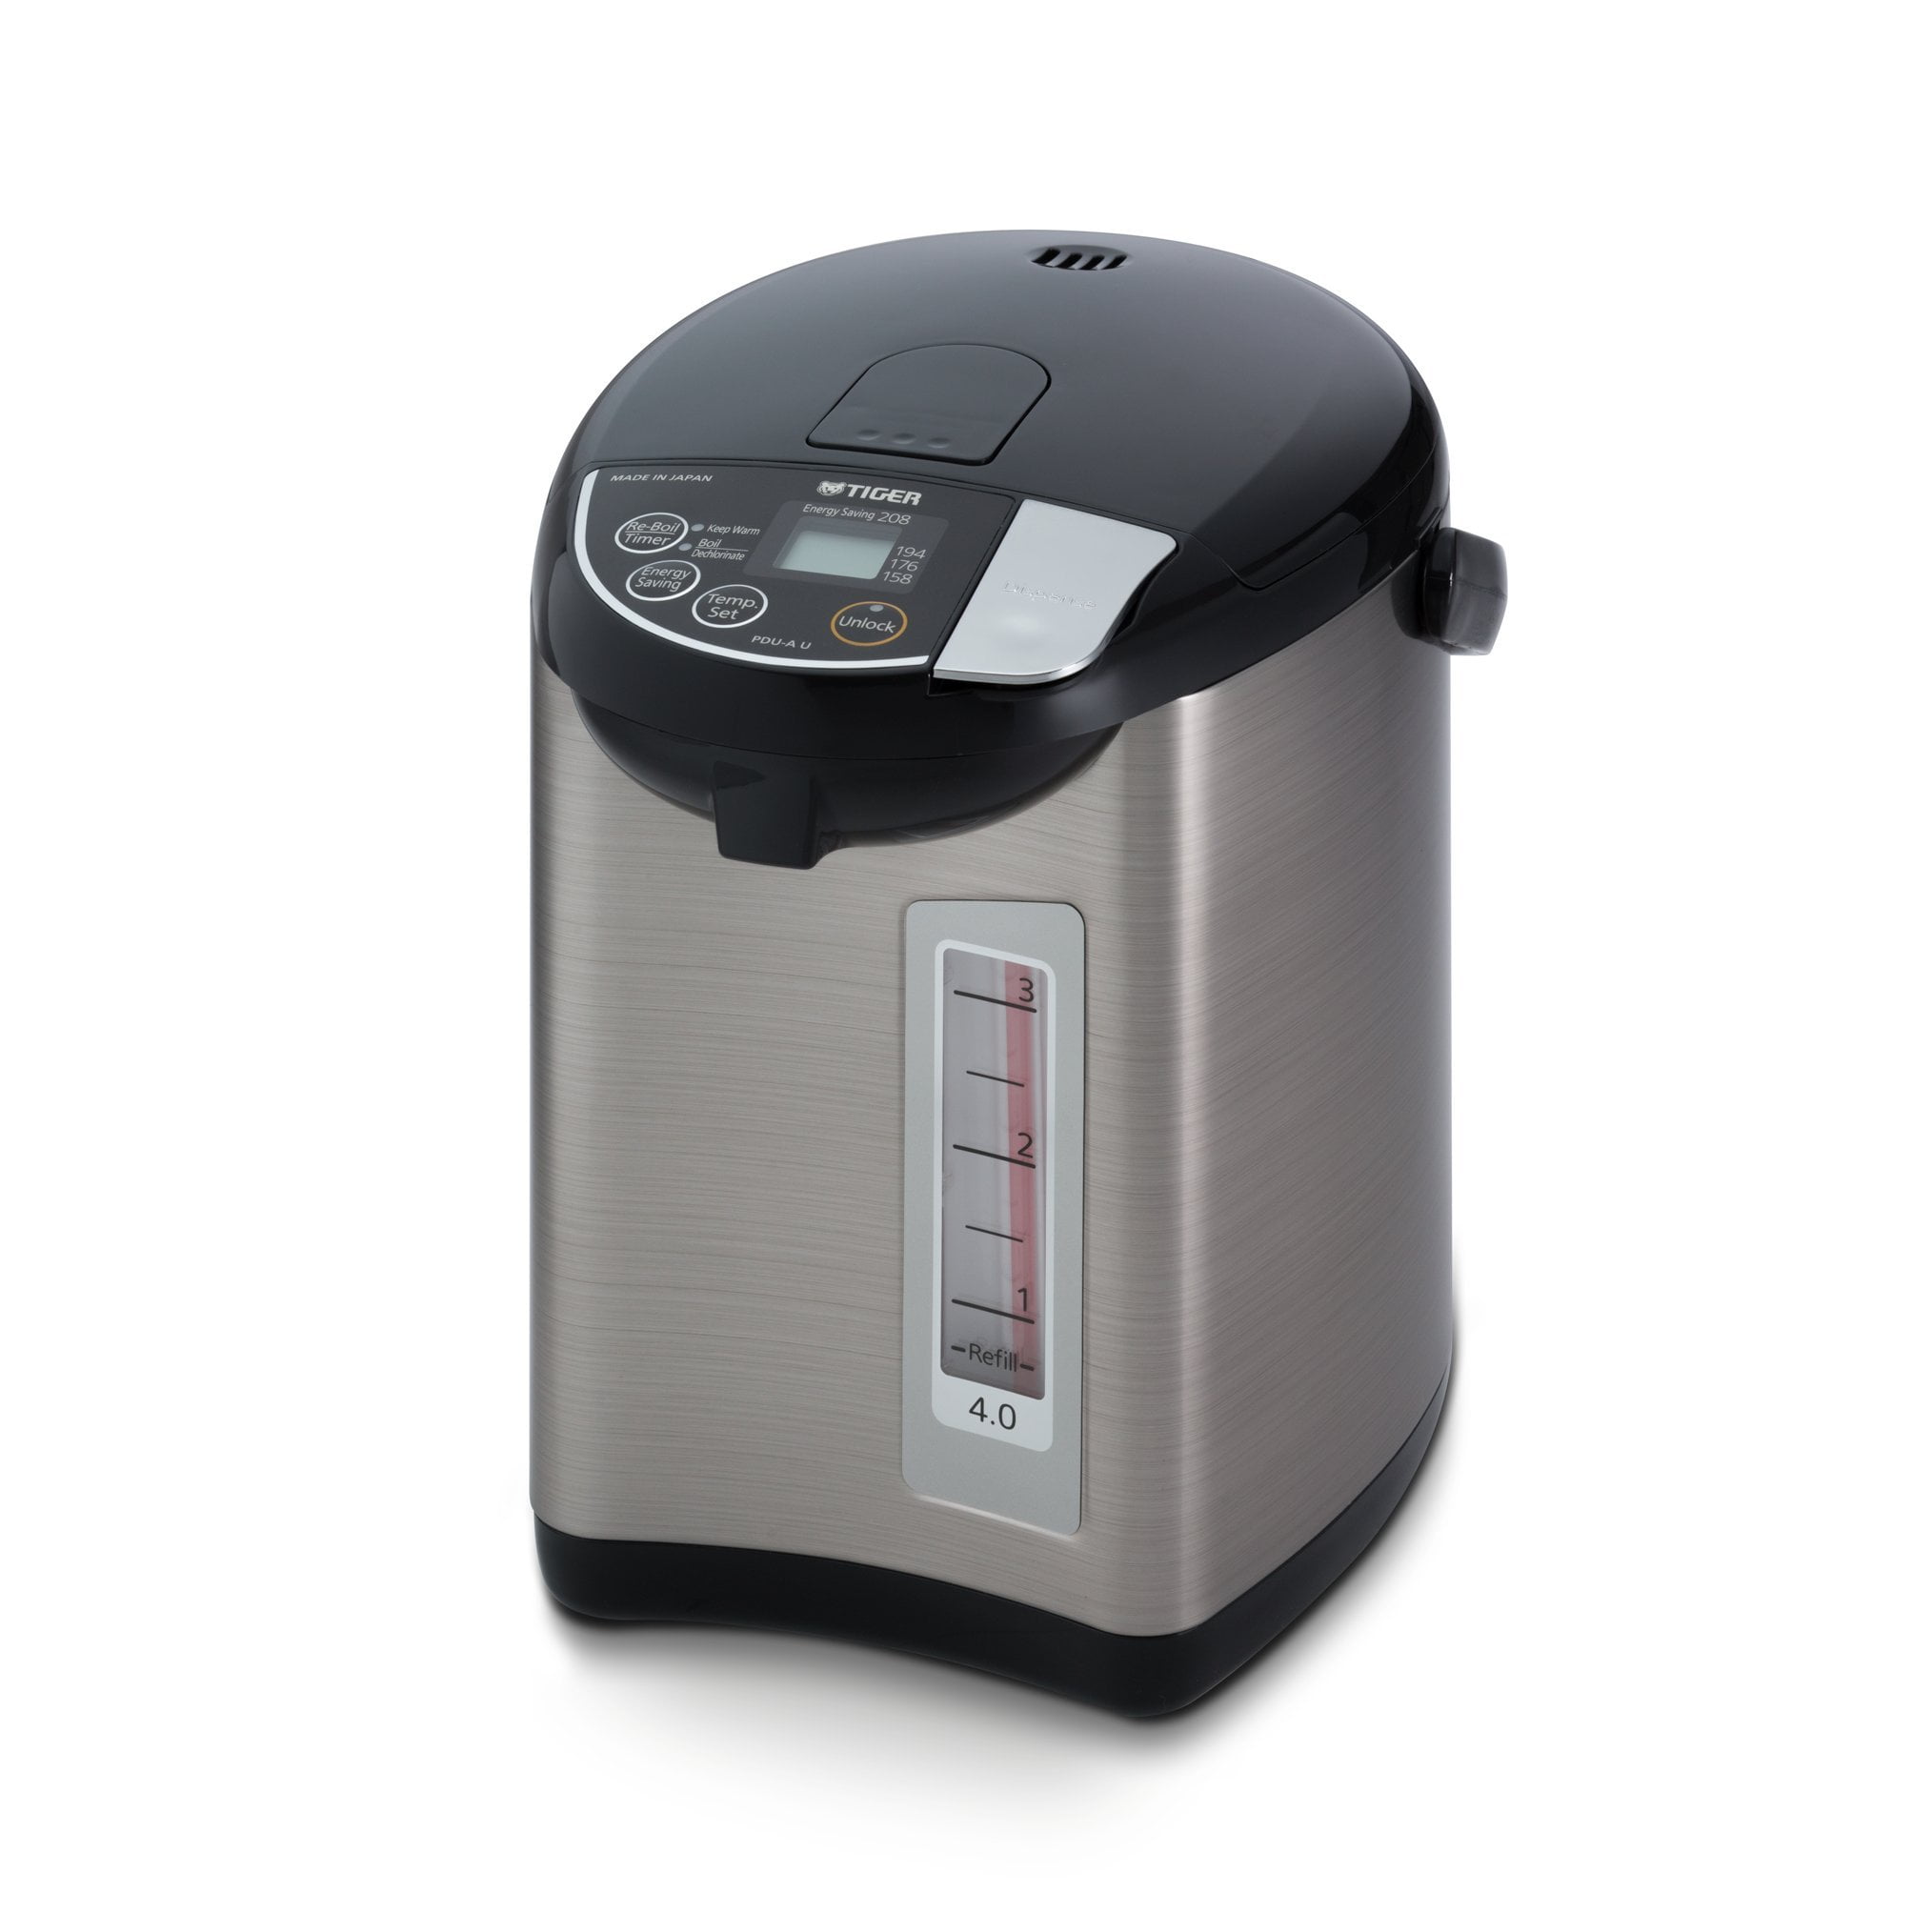 Tiger PDU-A30U-K 3.0-Liter Electric Water Boiler and Warmer, Stainless, Black